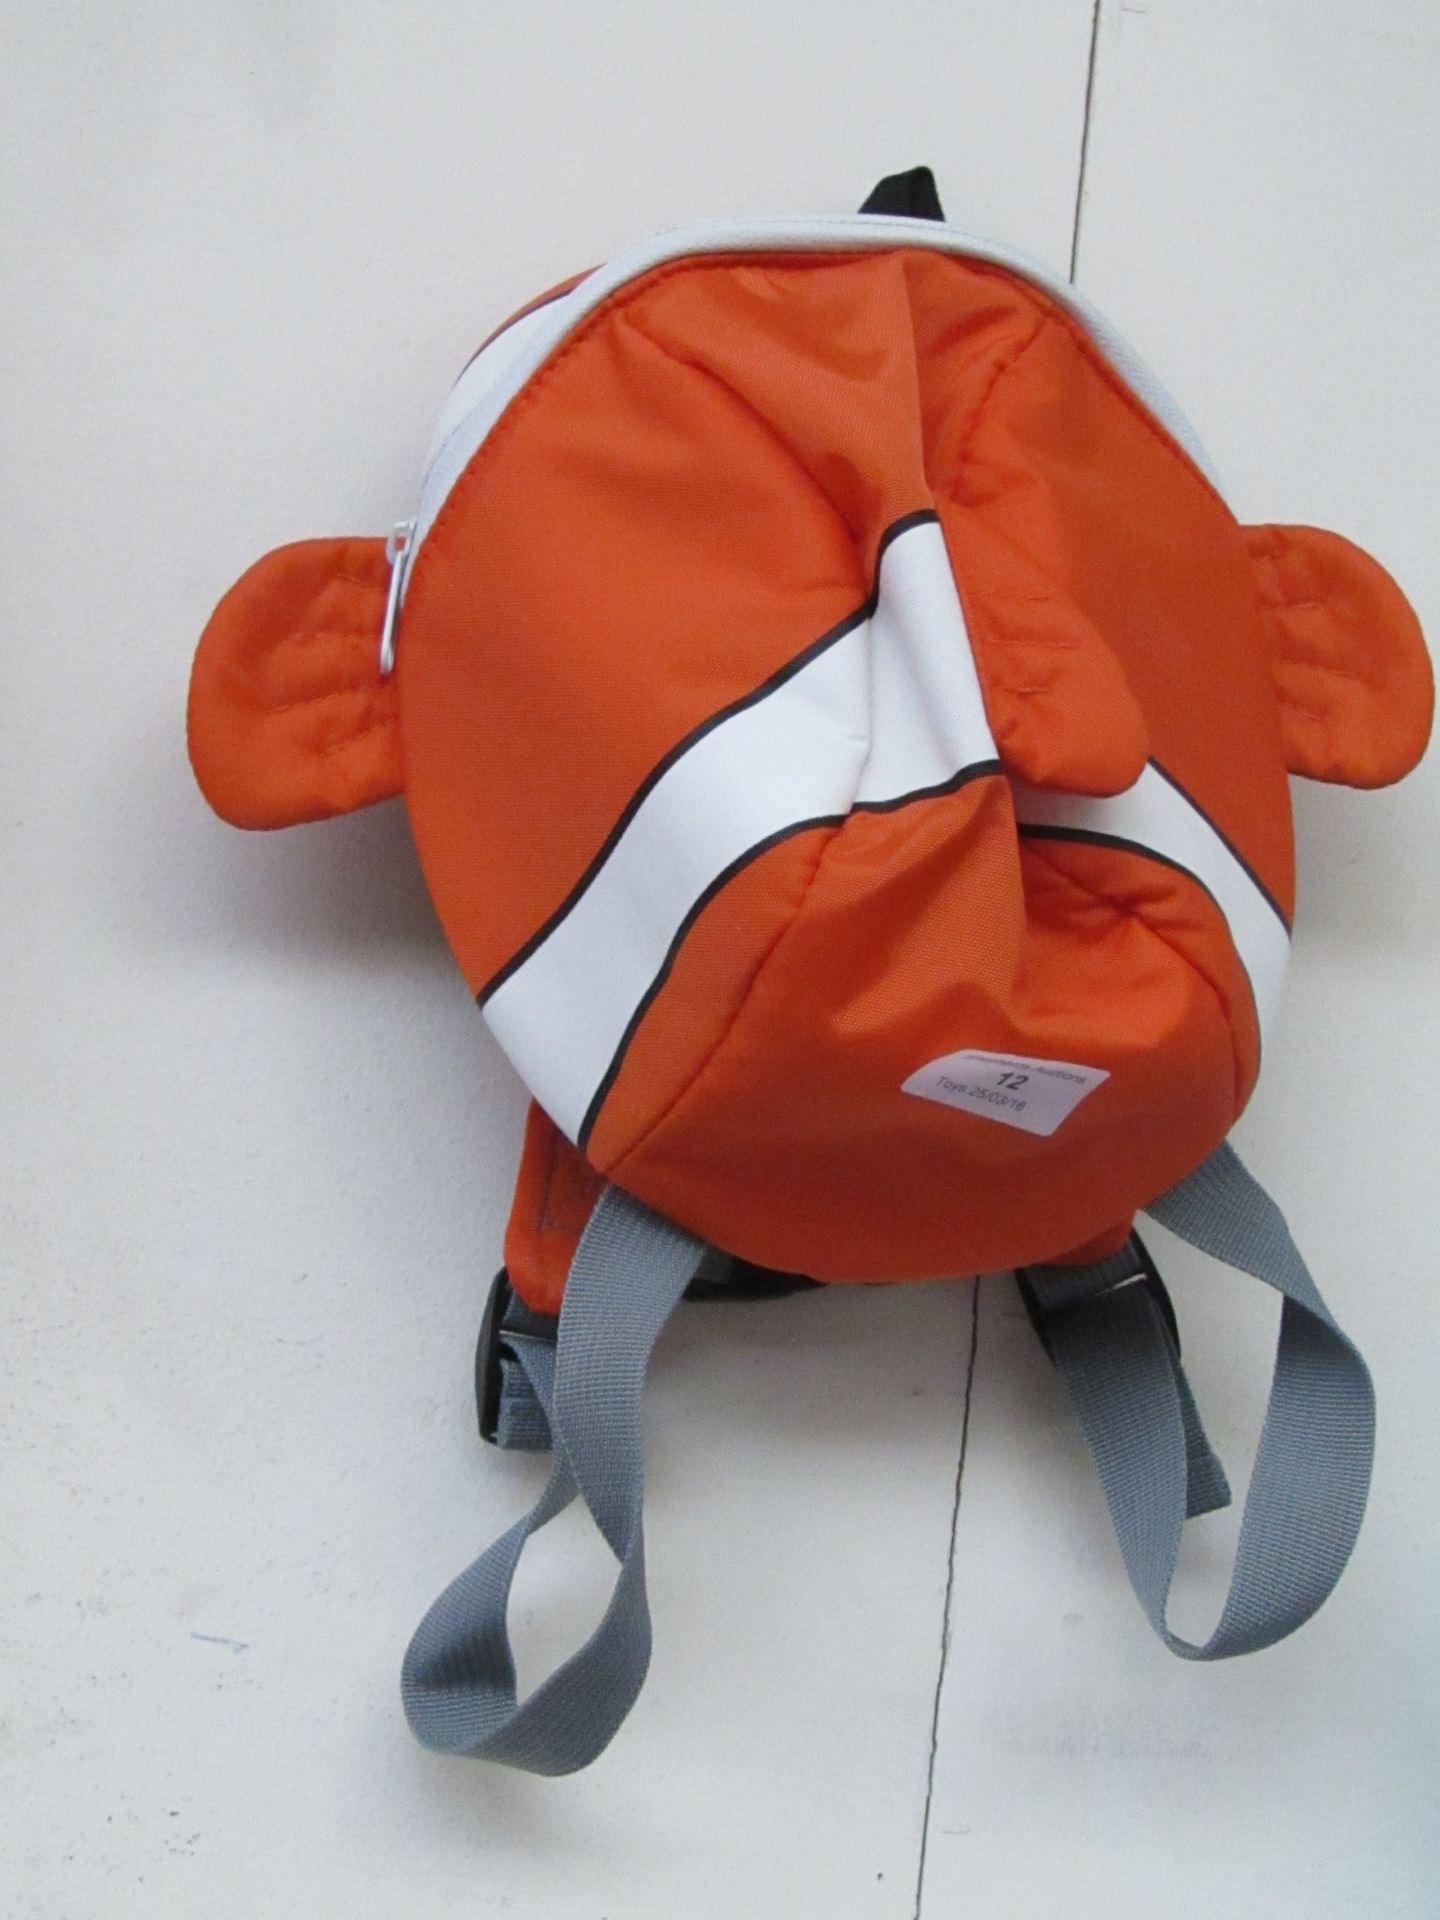 Character Backpack. See picture for design. New